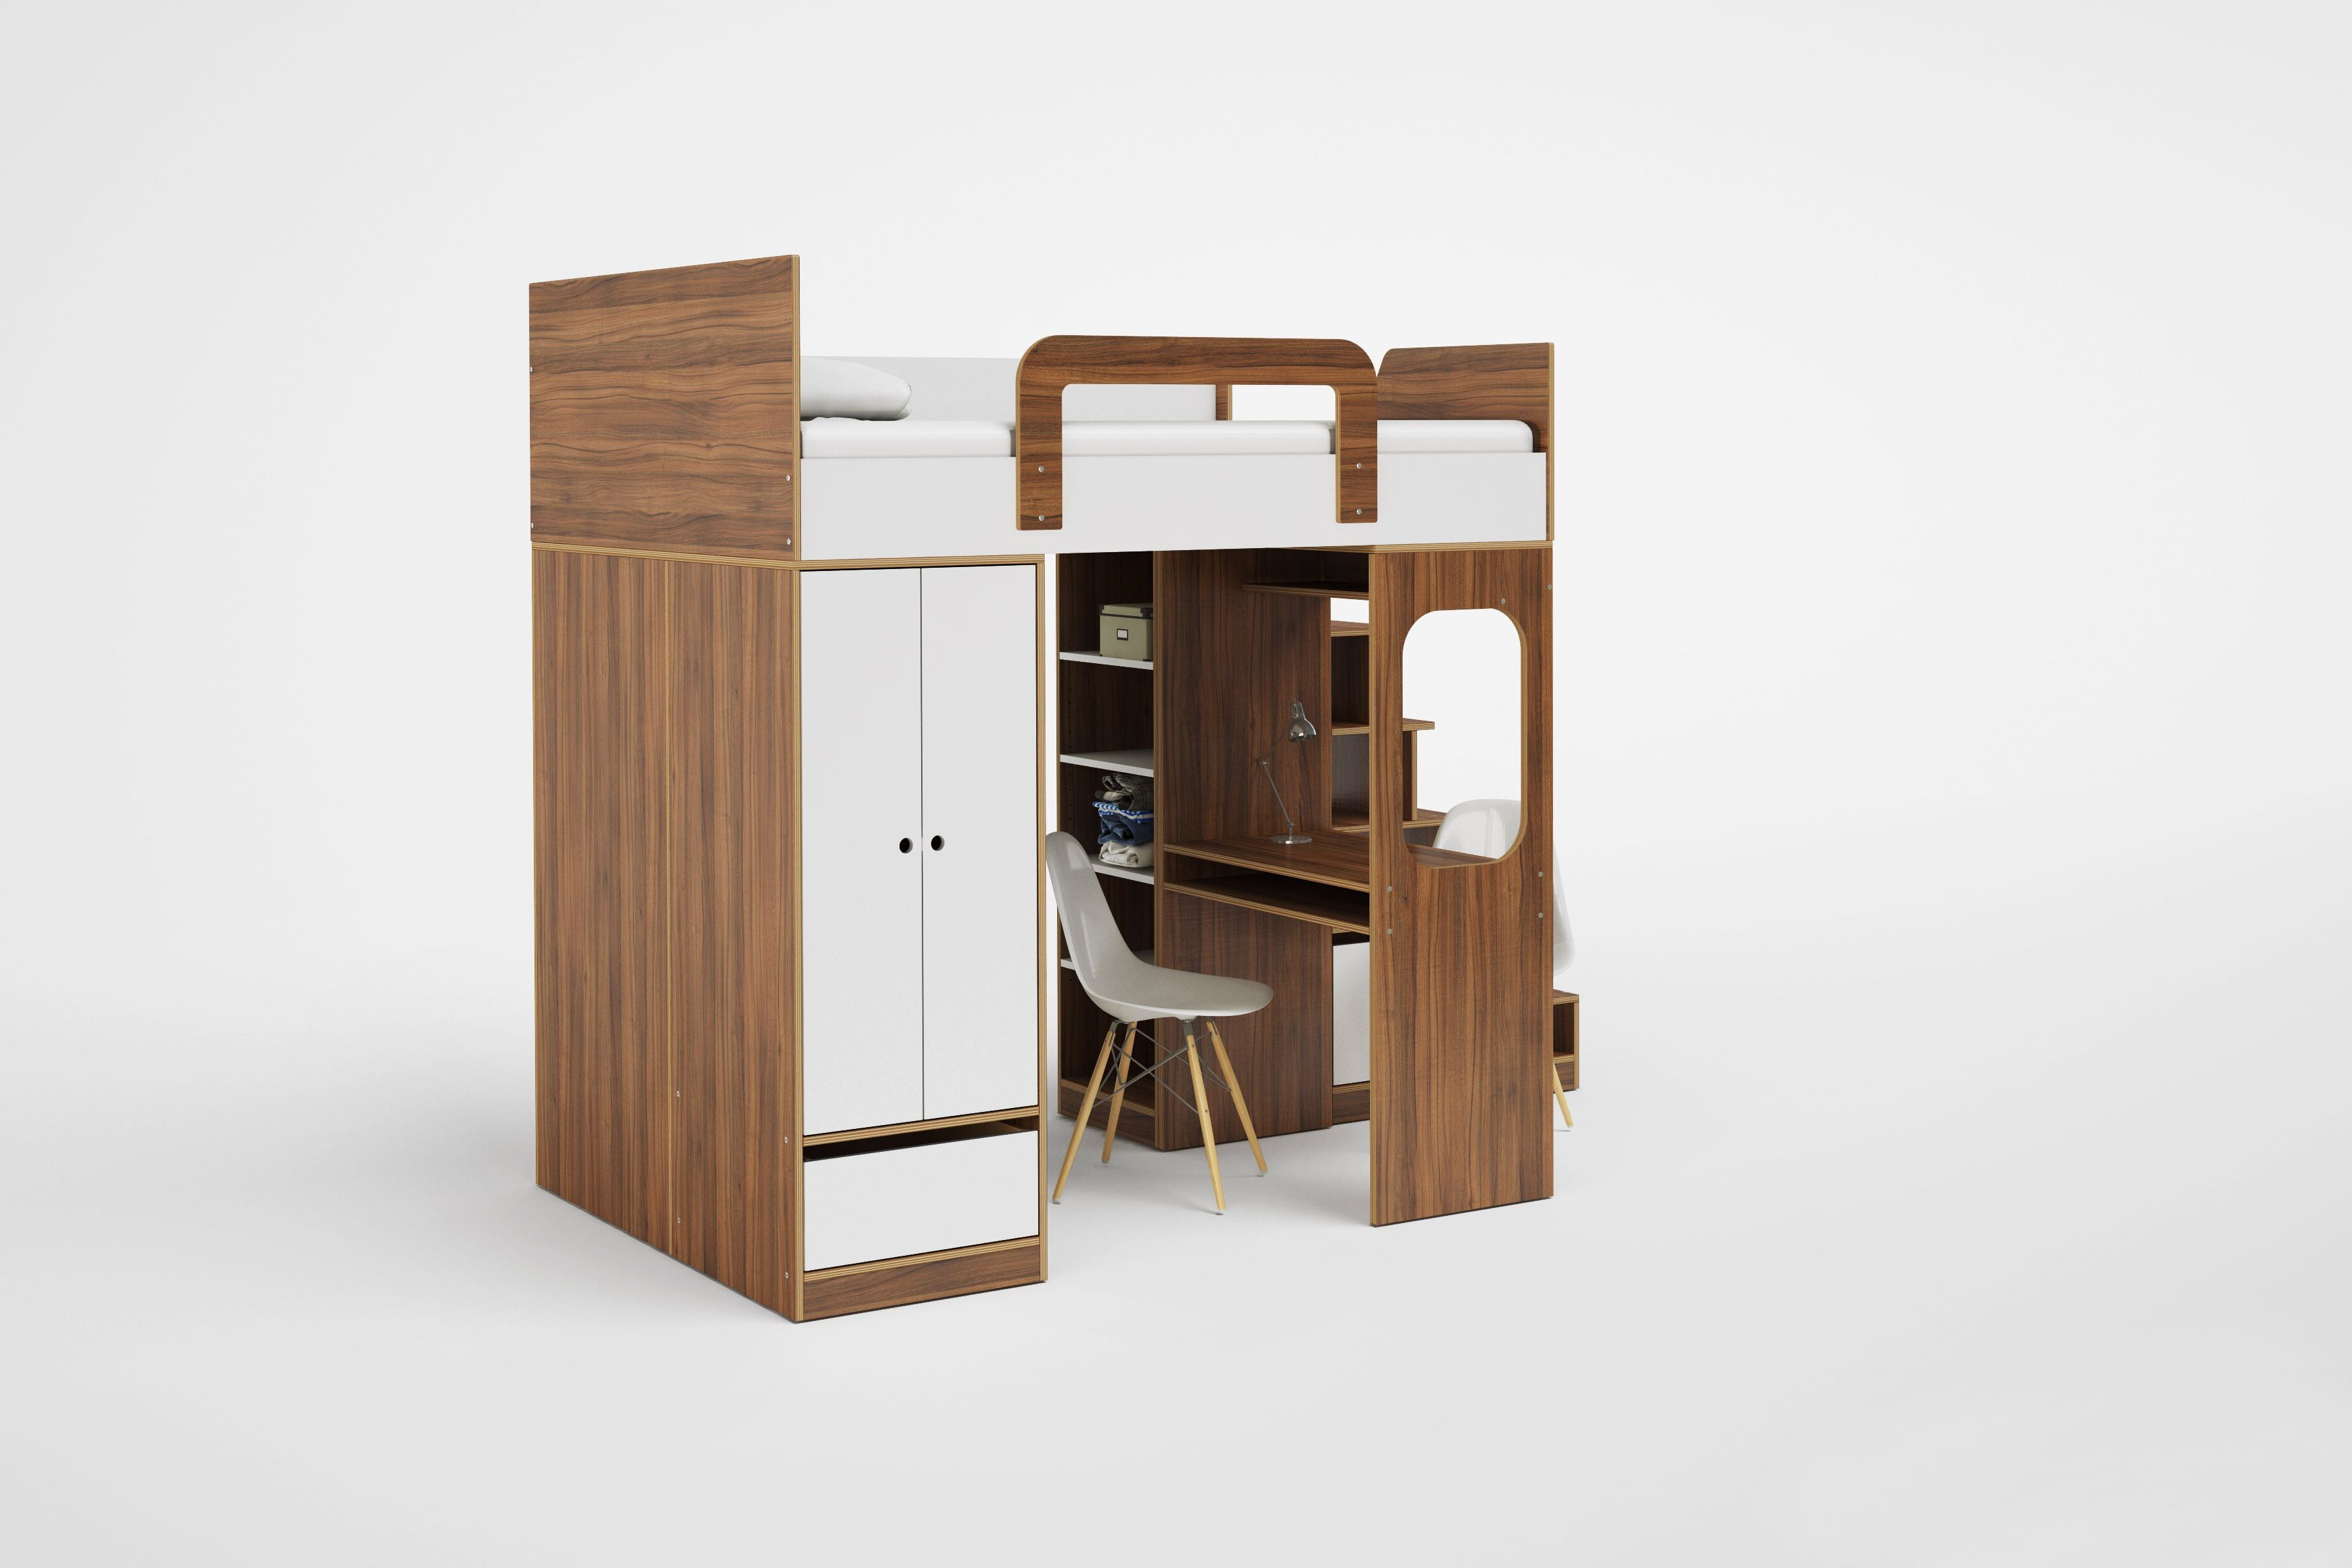 Space-saving wooden loft bed with integrated desk, shelves, and wardrobe on a white backdrop.